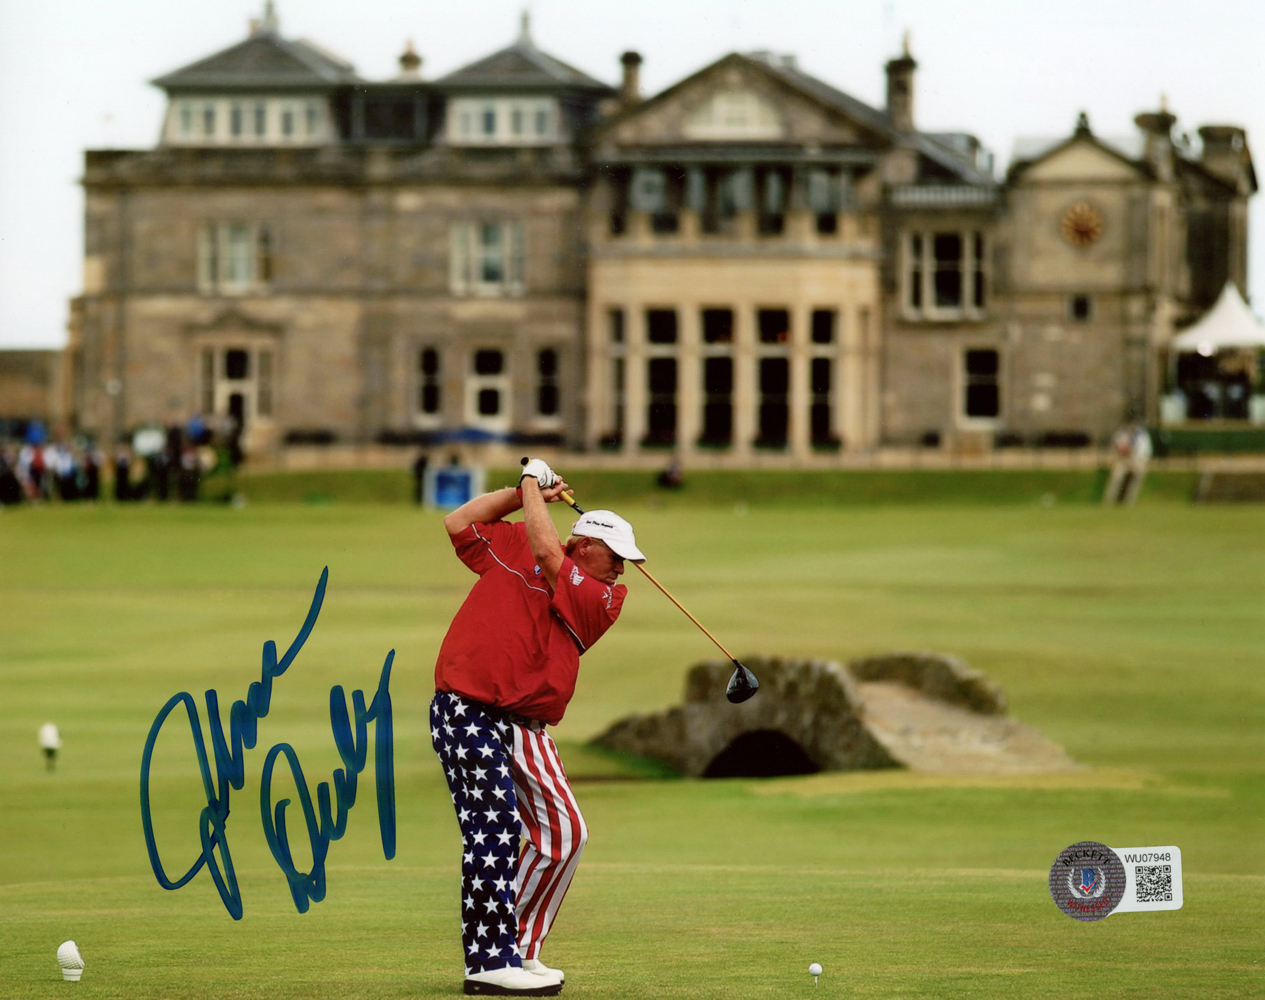 John Daly Autographed/Signed 8x10 Photo St Andrews Golf Course Beckett